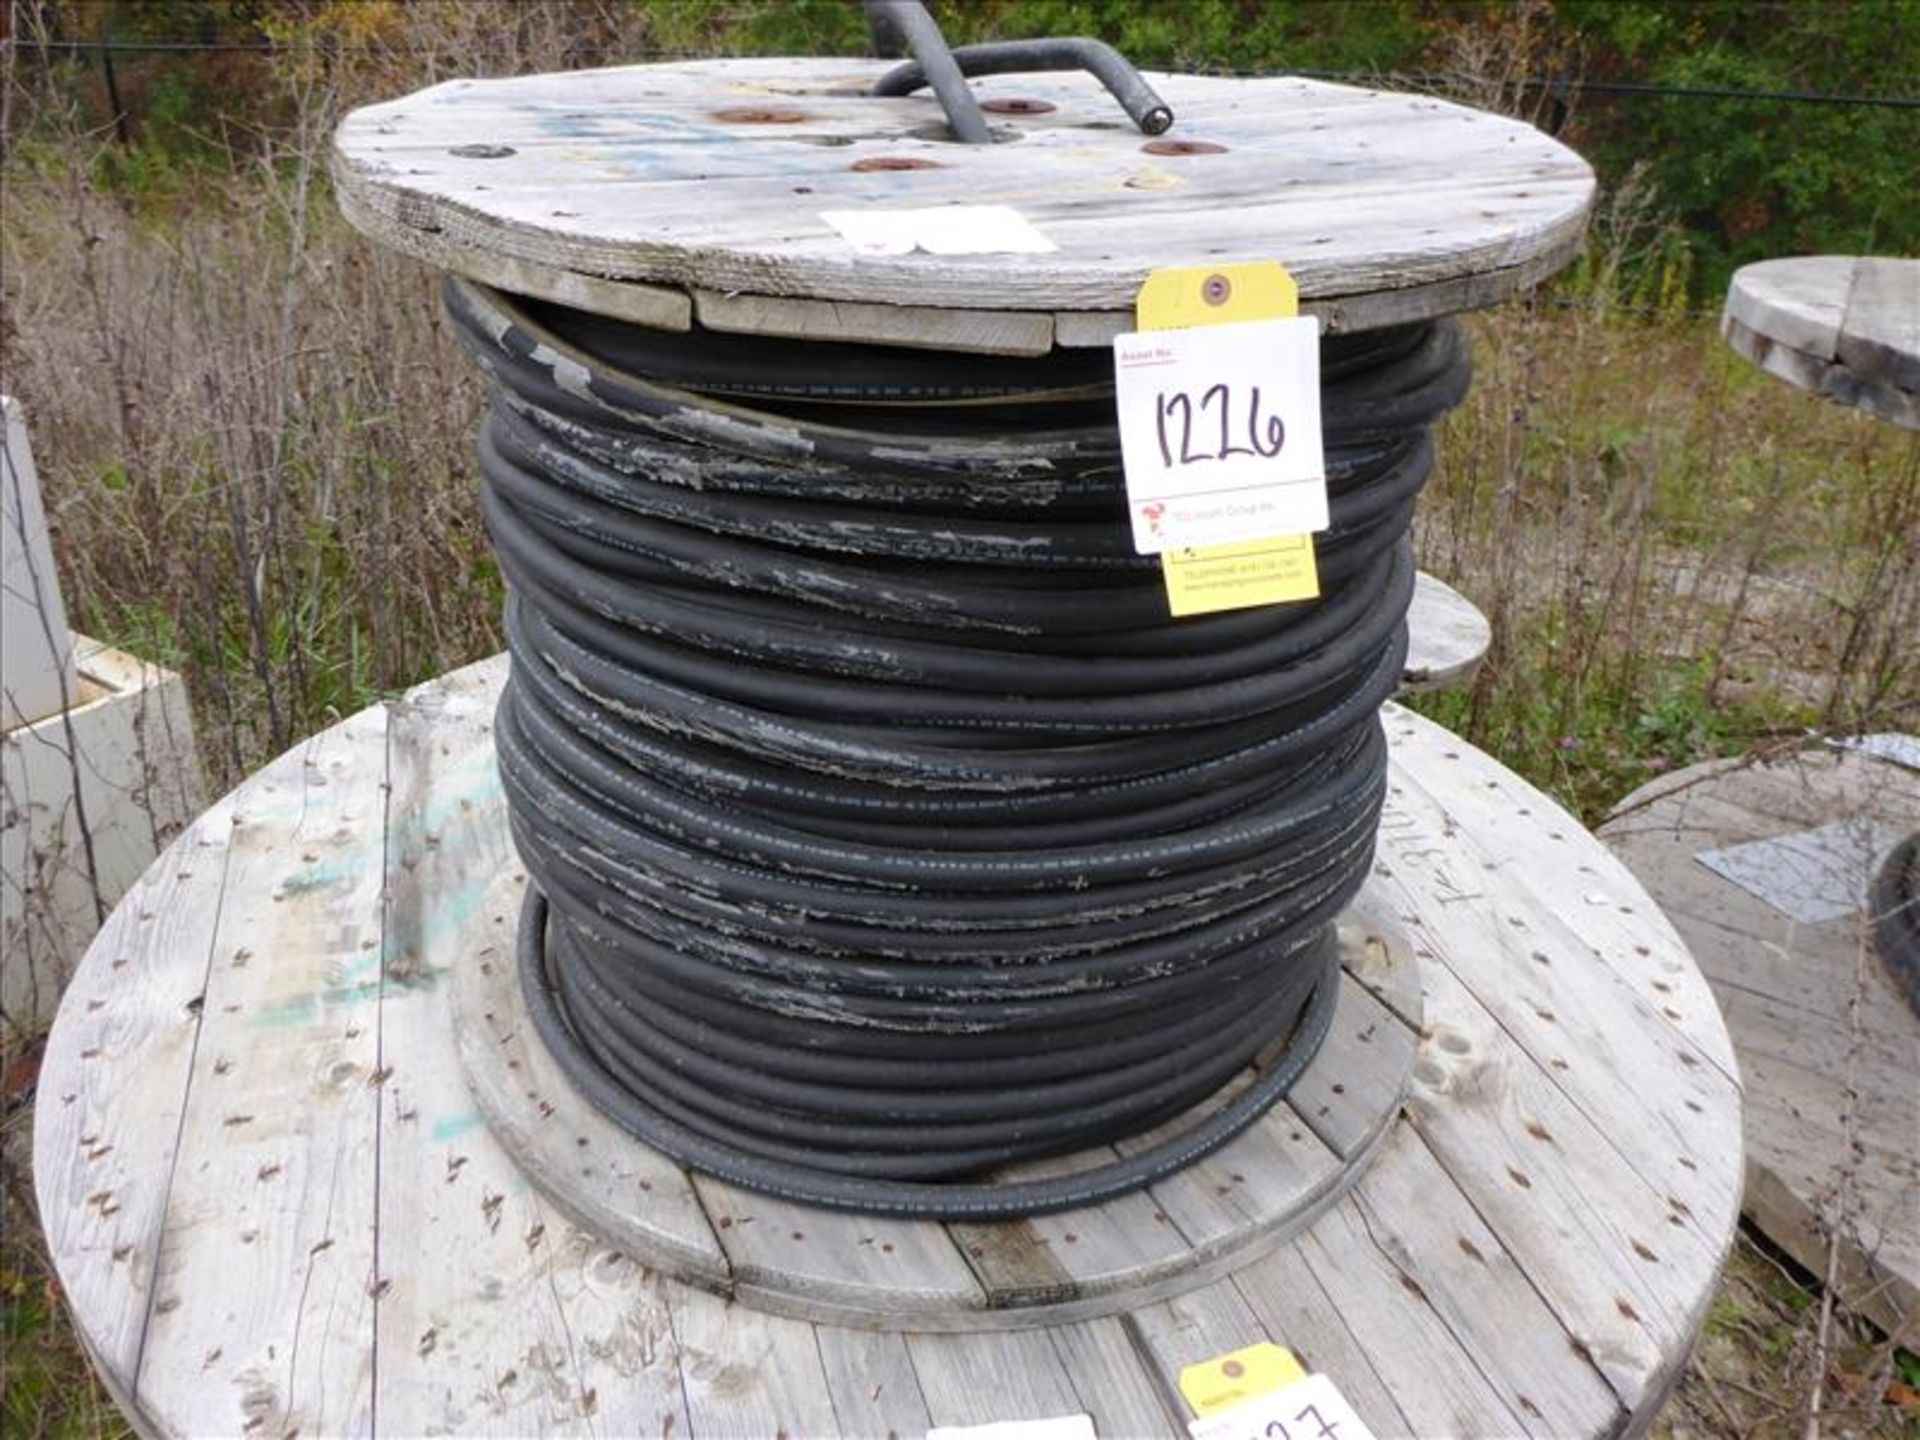 reel of electrical cable, approx. 900 ft. CCI Royal 12/C 14 AWG (2.08mm2) SOOW E54864-L 600V (-